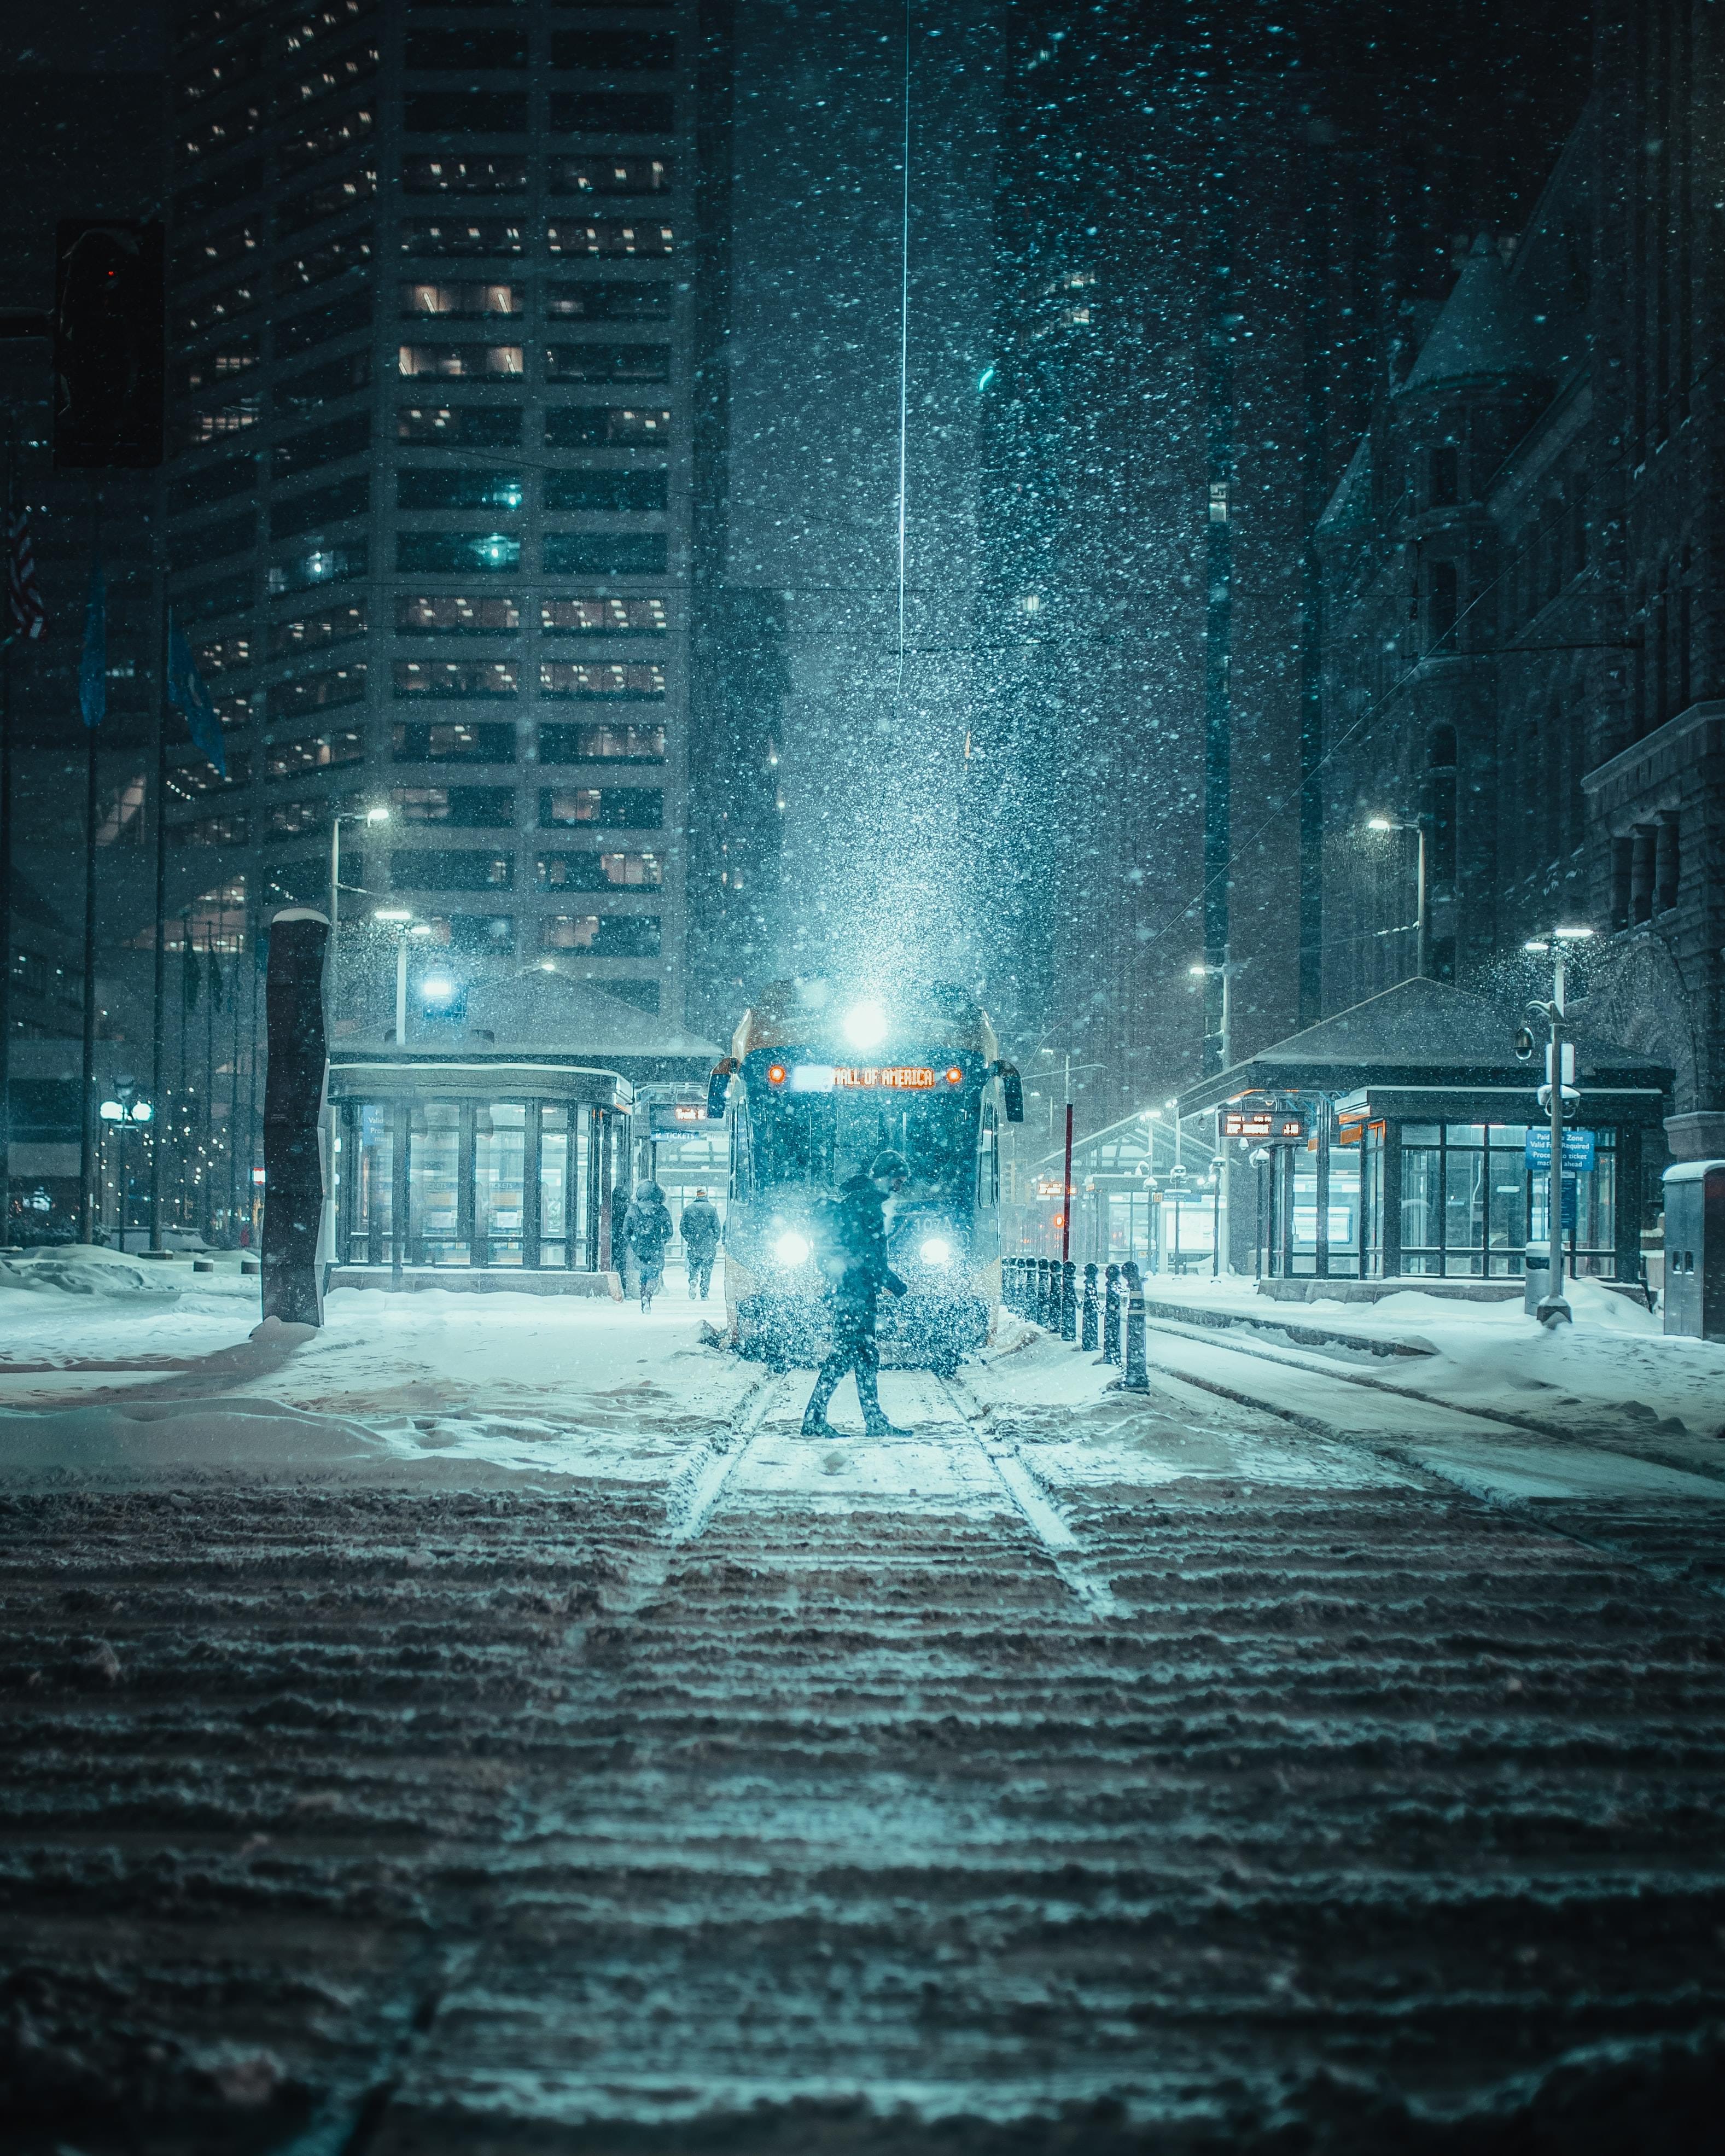 Person Standing in front of a Train in the wintertime